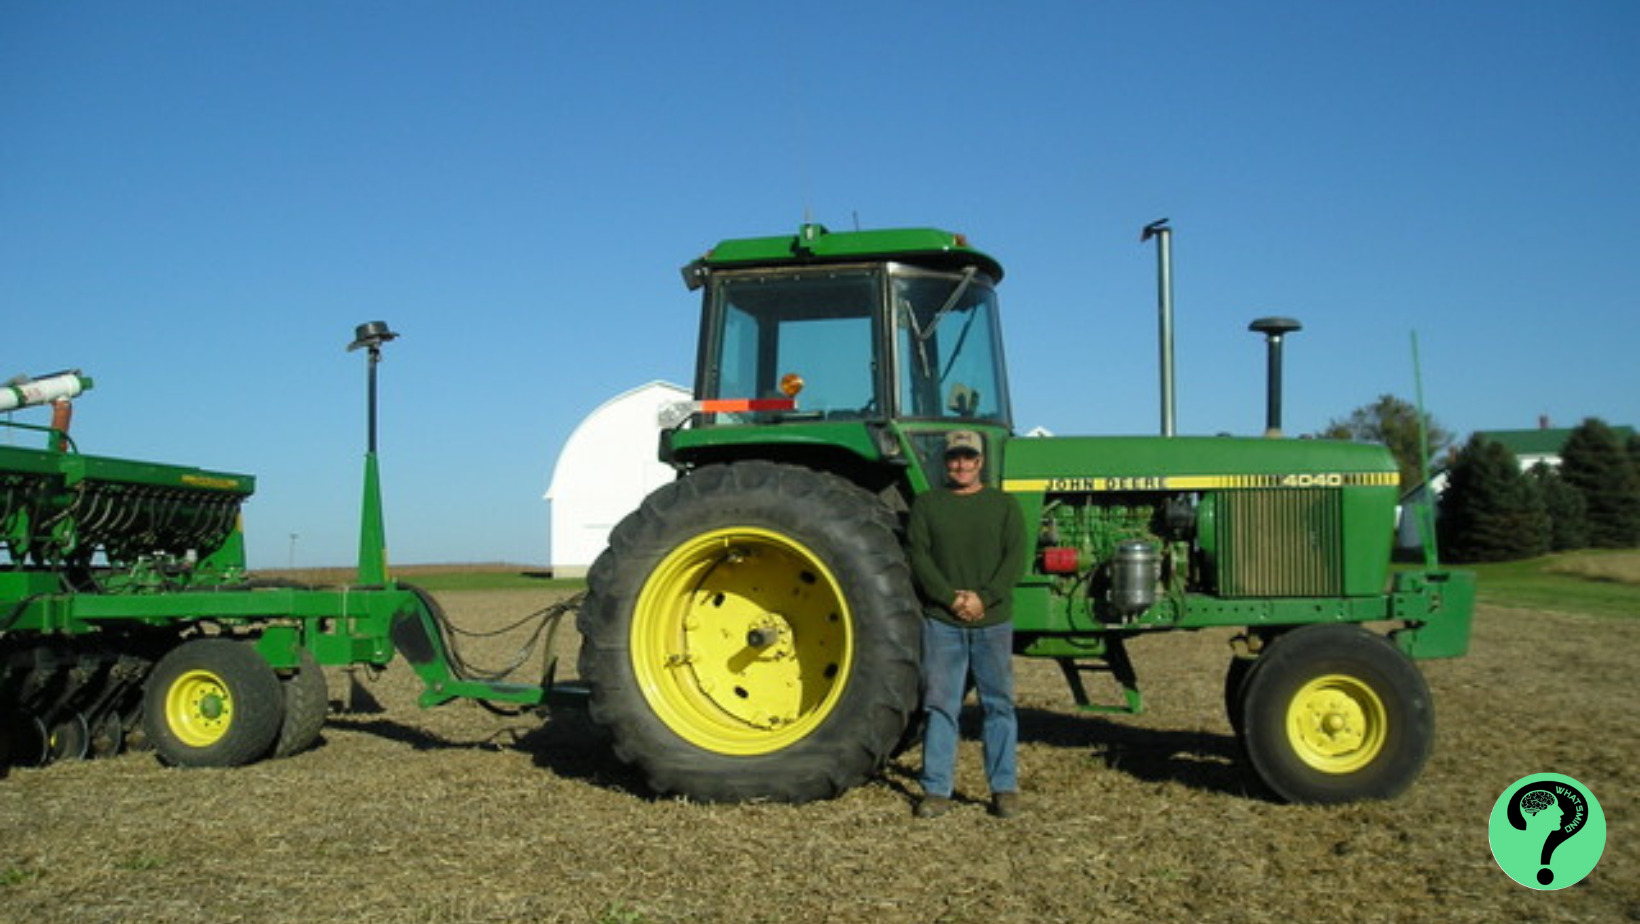 AgTalk: Contecting Farmers, Ranchers and Agribusinesses